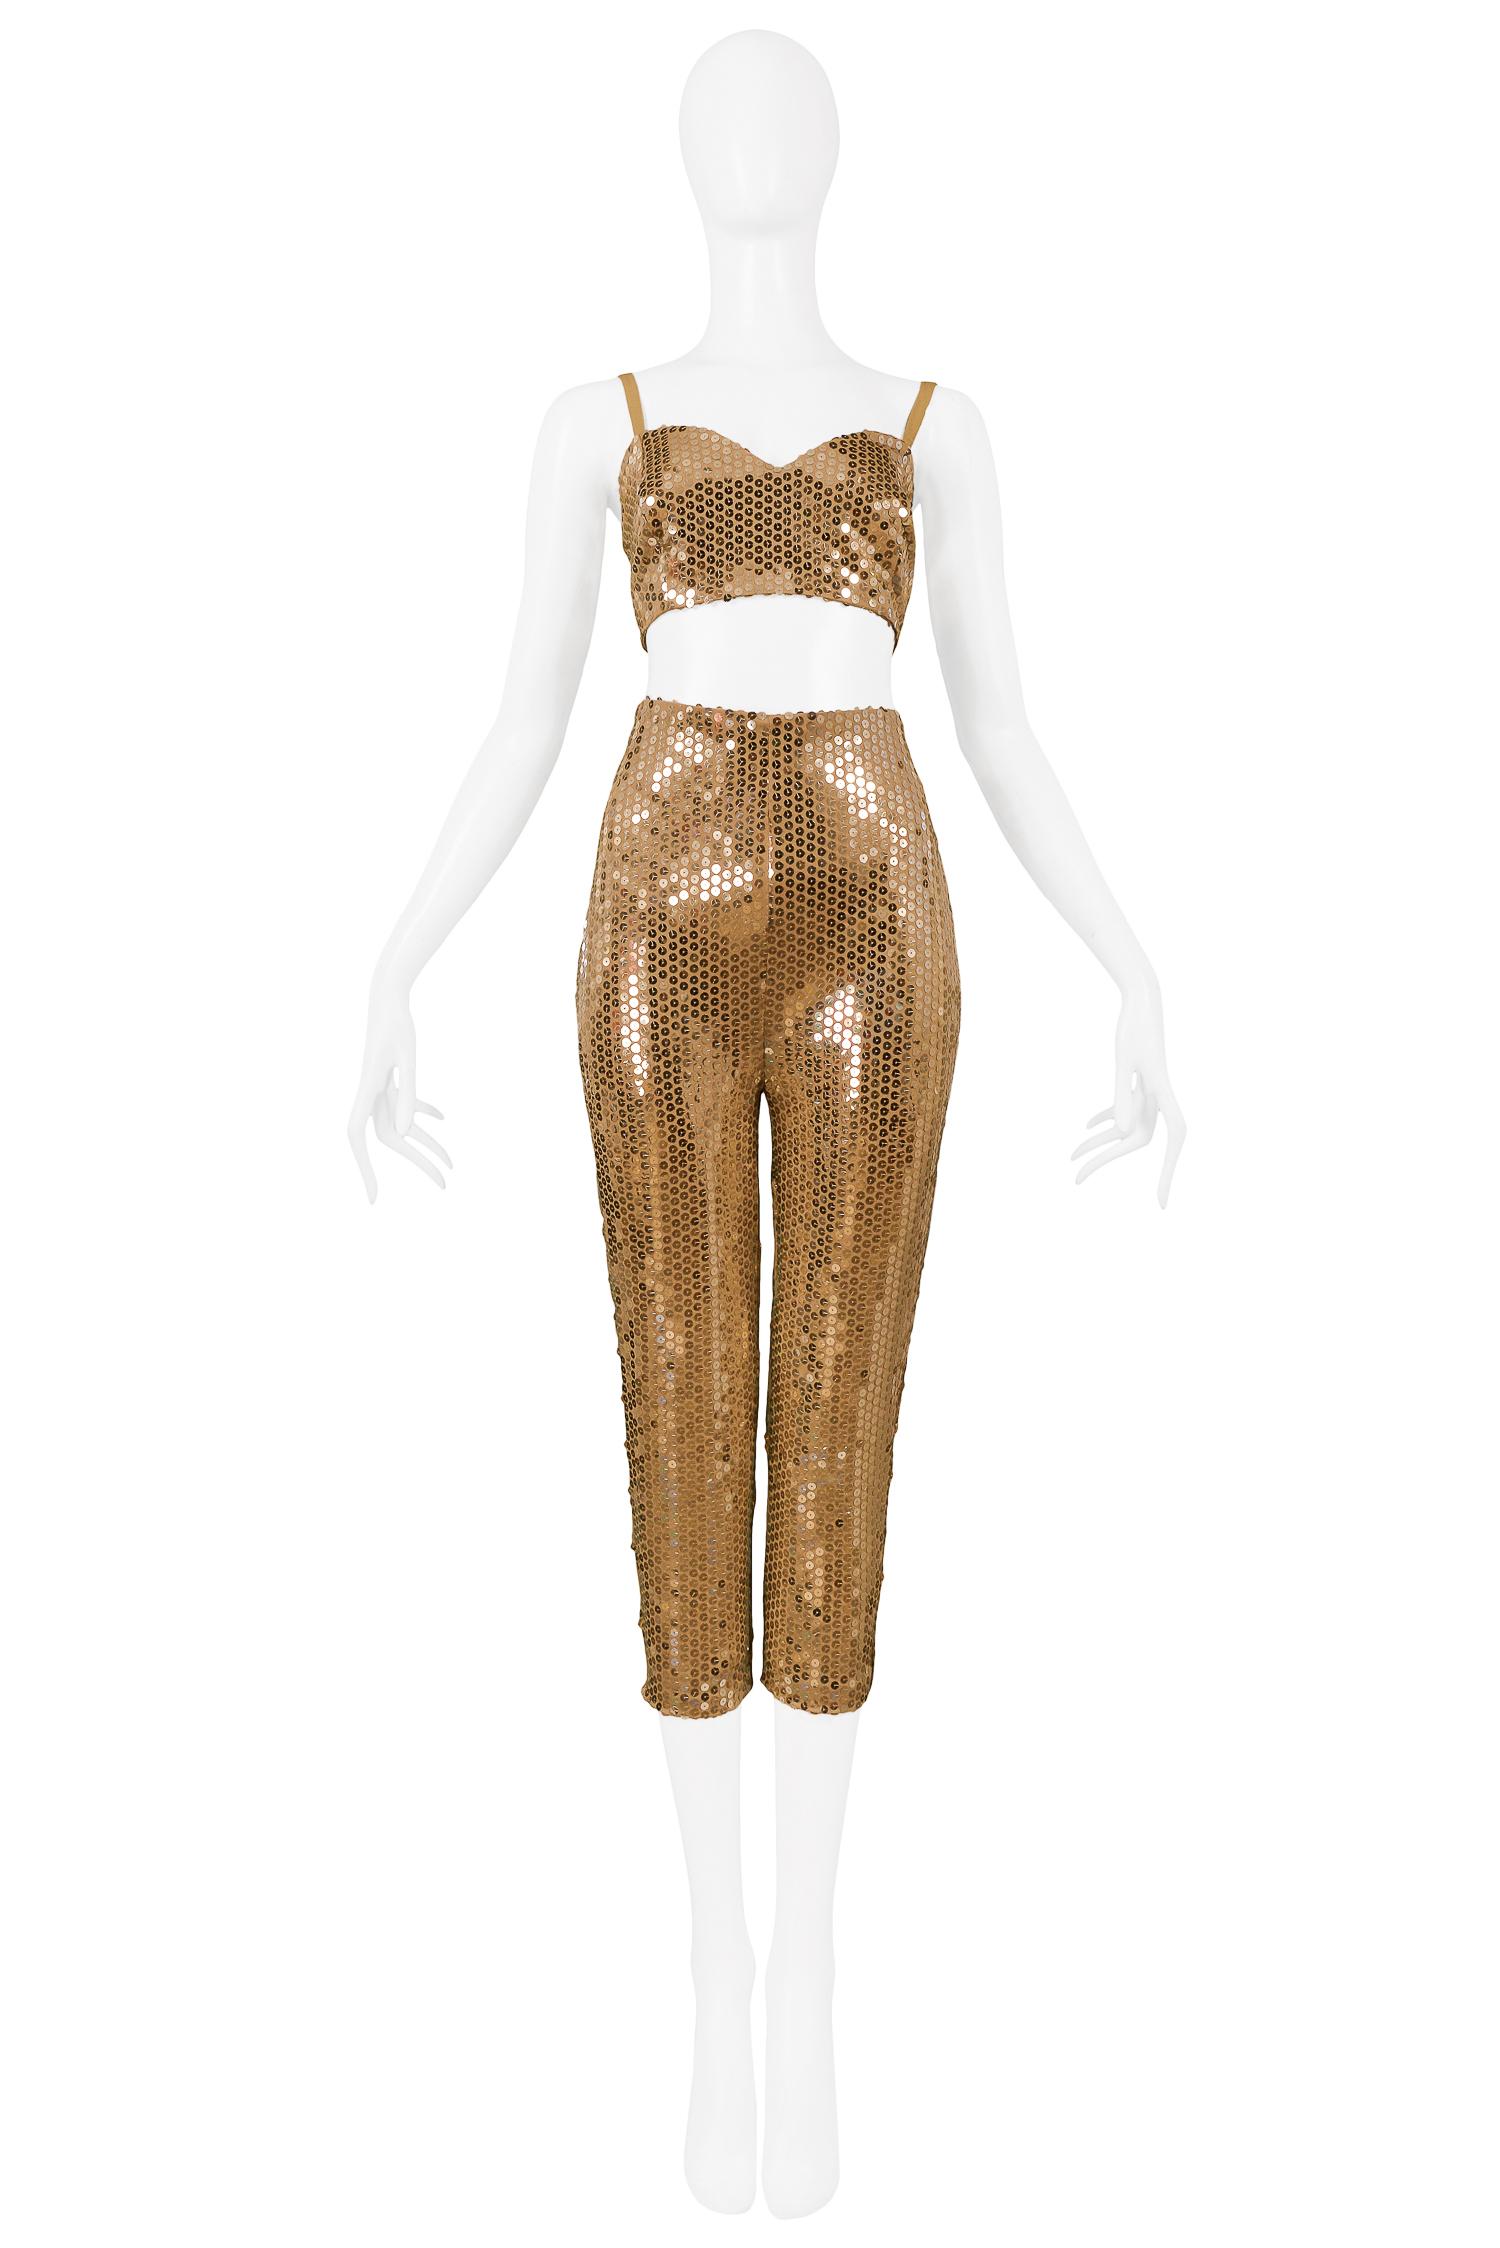 Vintage Byblos gold sequin bra top and cigarette pant ensemble. Bra top features 3-button closure at back, and pants are high waisted with center back zipper closure. Collection 1991.

Excellent Vintage Condition.

Size:
Top 44
Pants 42